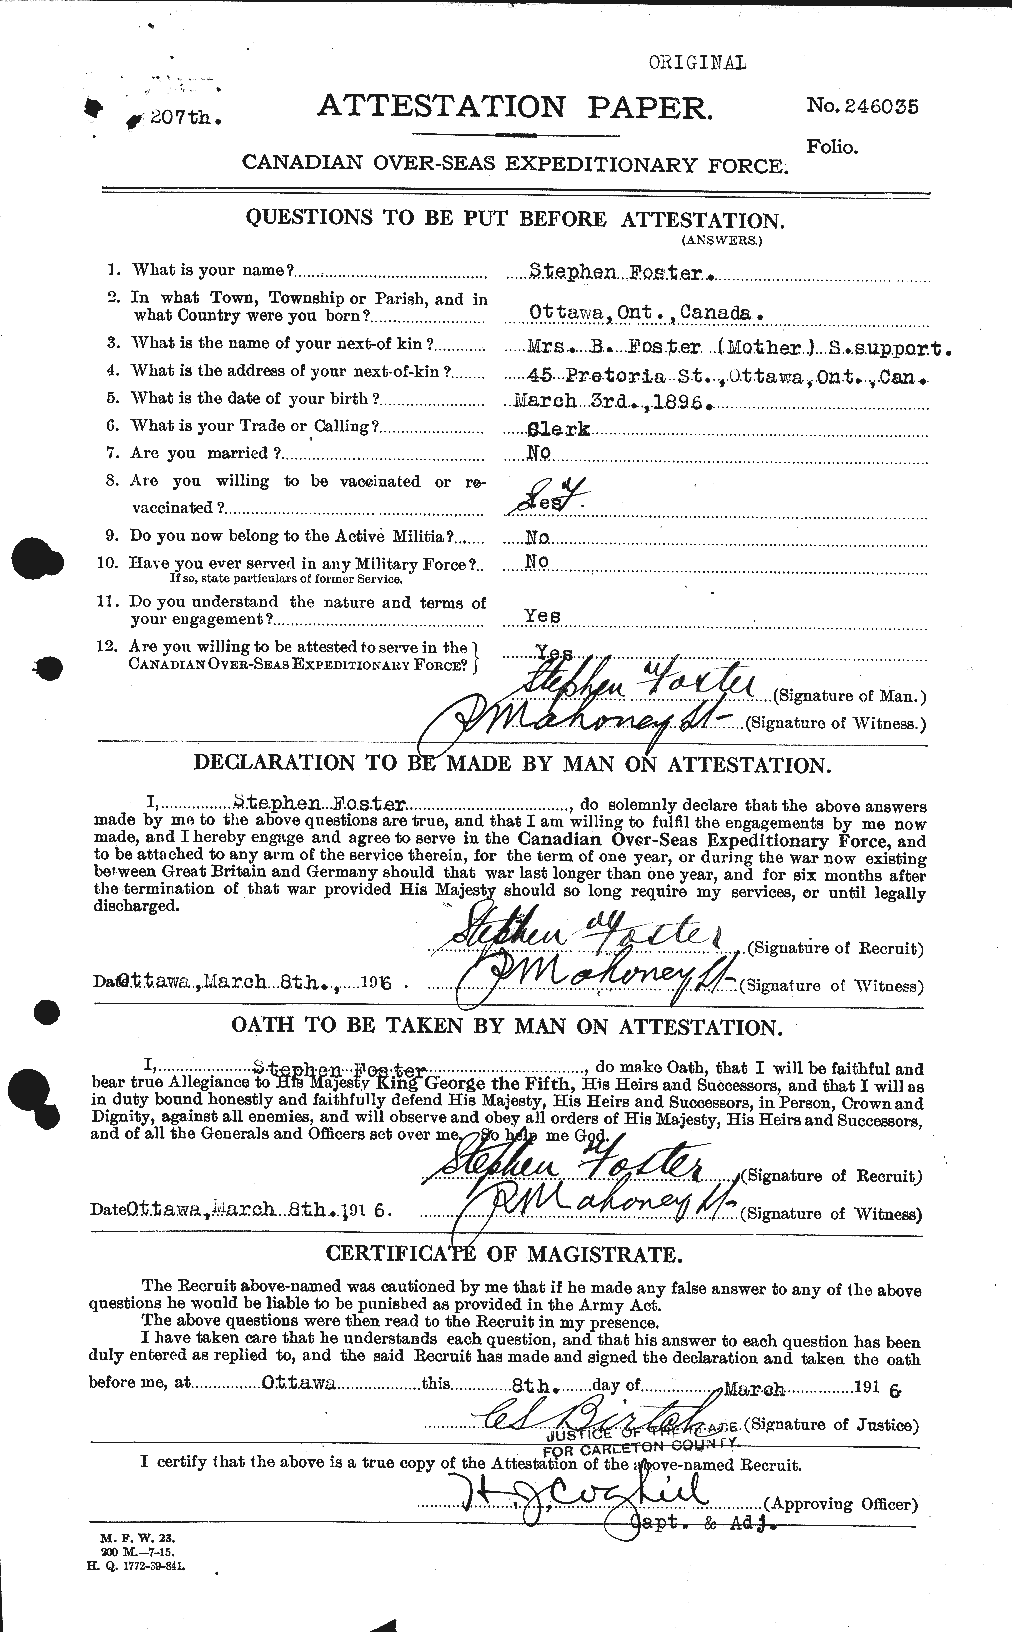 Personnel Records of the First World War - CEF 335216a